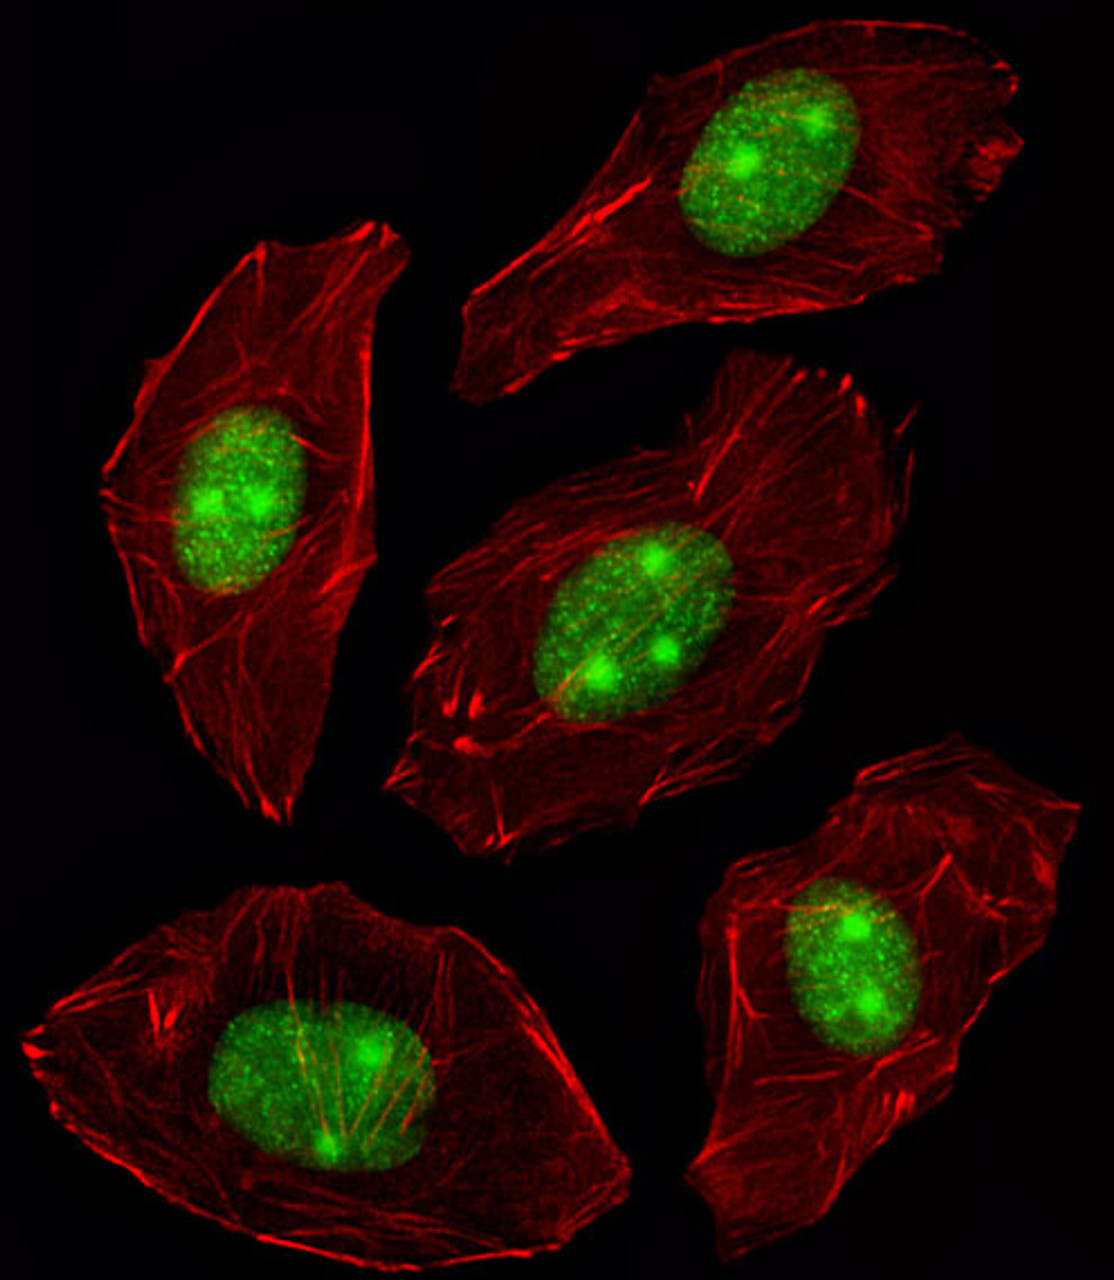 Fluorescent image of A549 cell stained with NPM1 Antibody . A549 cells were fixed with 4% PFA (20 min) , permeabilized with Triton X-100 (0.1%, 10 min) , then incubated with NPM1 primary antibody (1:25) . For secondary antibody, Alexa Fluor 488 conjugated donkey anti-rabbit antibody (green) was used (1:400) .Cytoplasmic actin was counterstained with Alexa Fluor 555 (red) conjugated Phalloidin (7units/ml) .NPM1 immunoreactivity is localized to Nucleus and Nucleolus significantly.